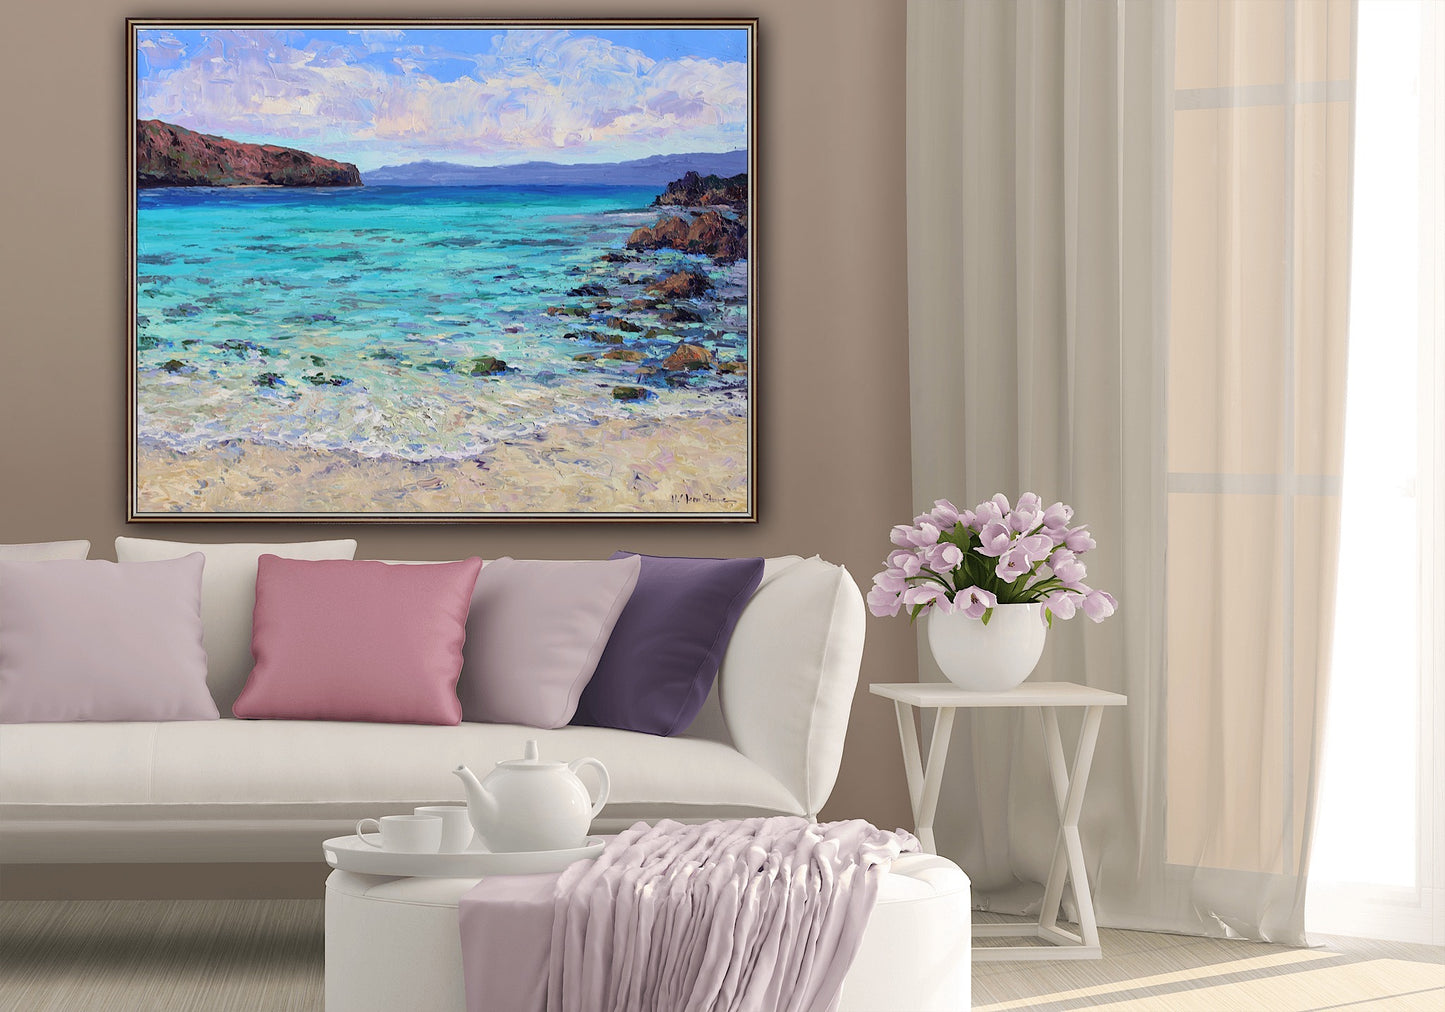 Another Day In Paradise, An Original 24" x  30" Seascape Oil On Canvas Of Balandra Bay